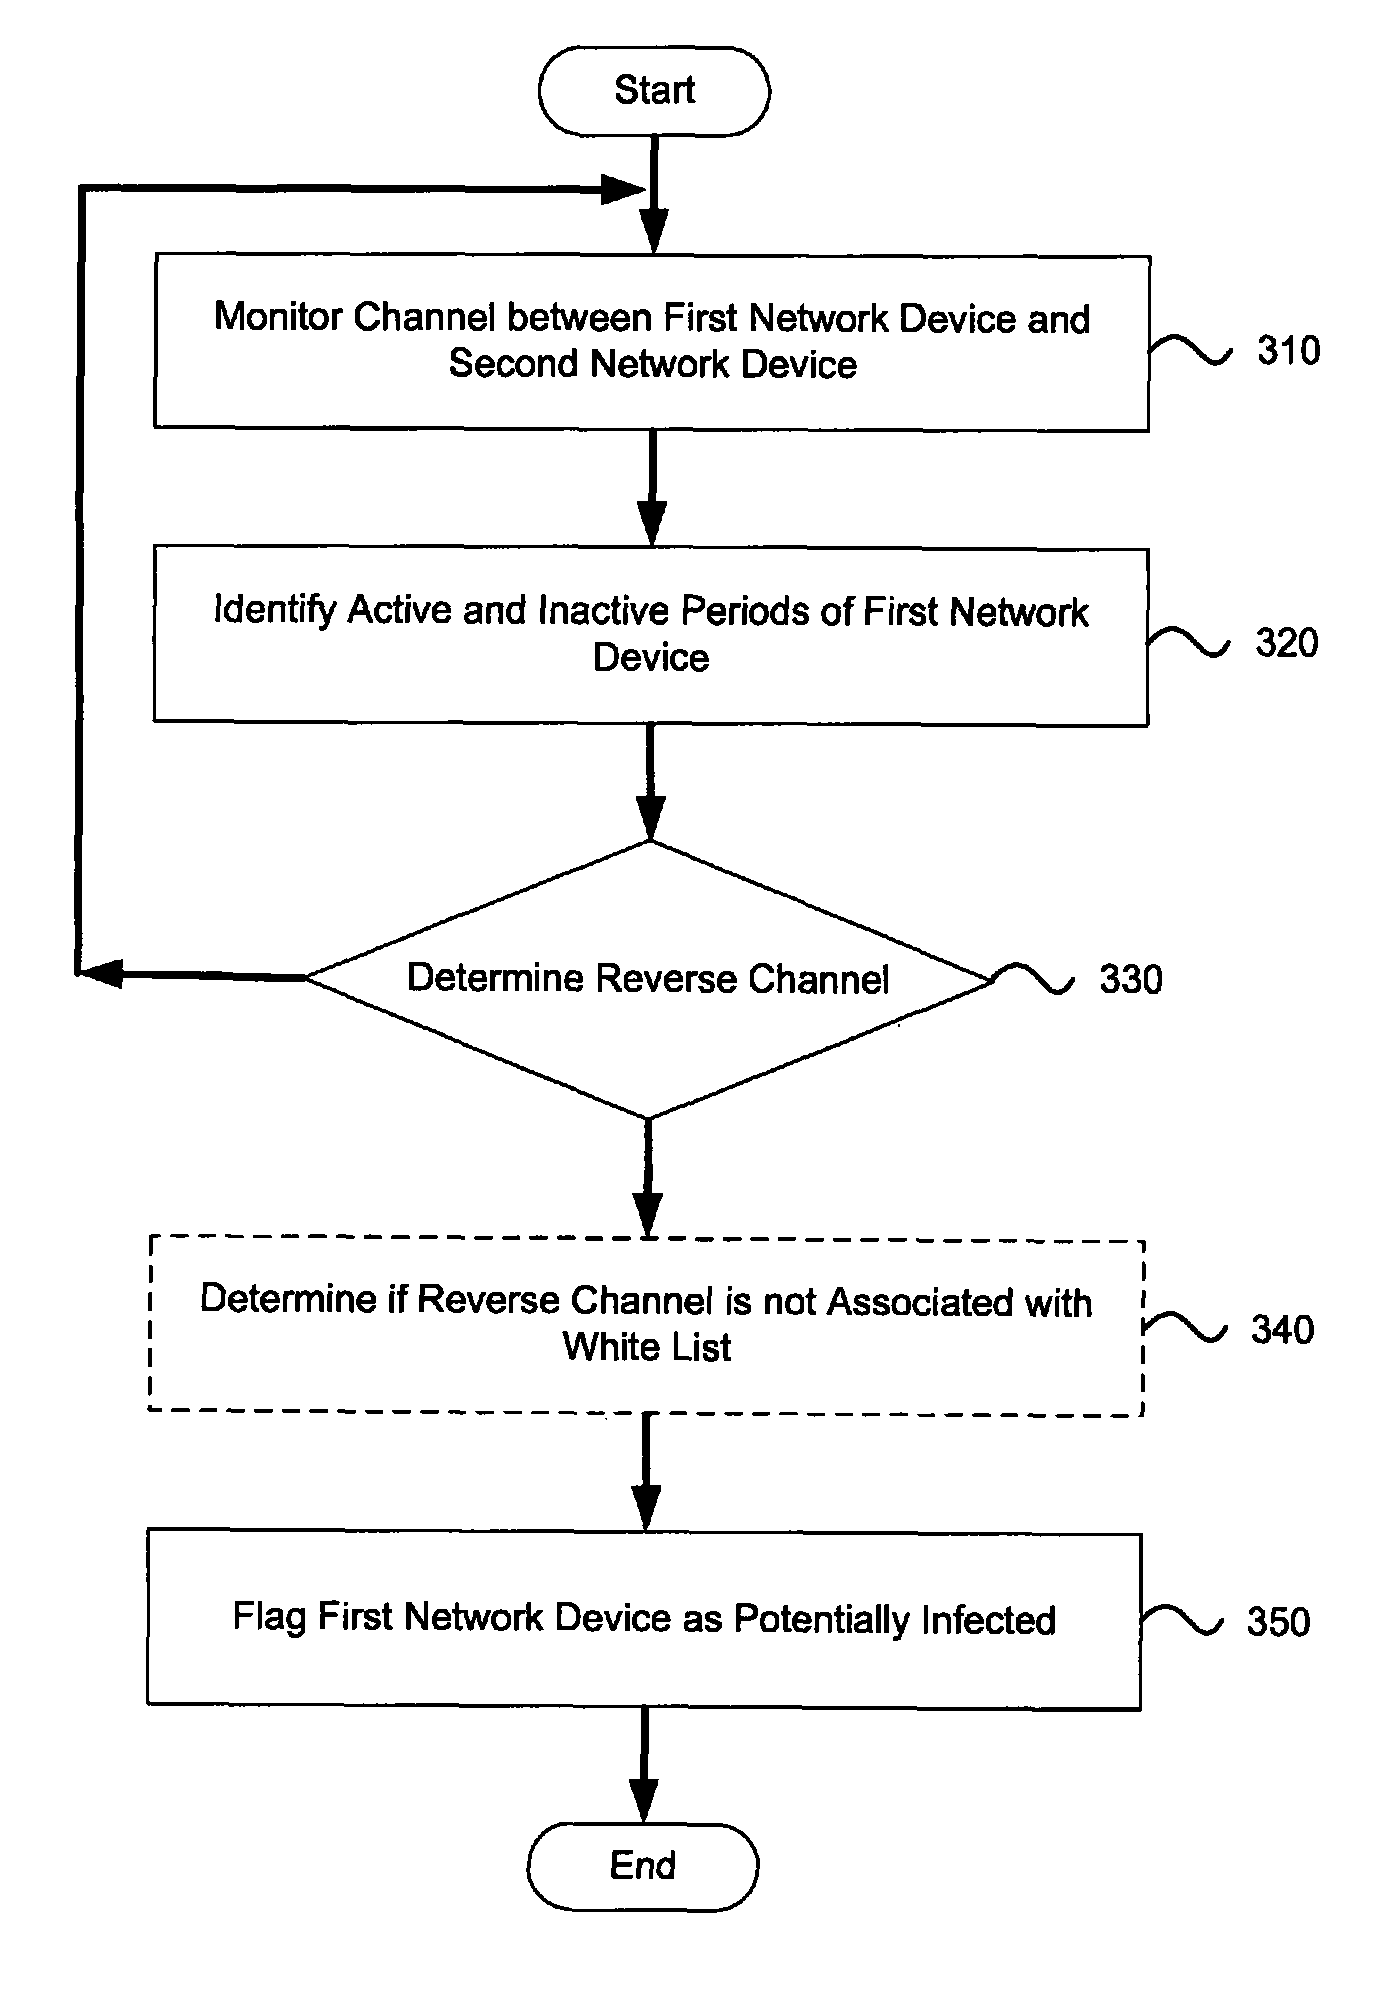 Systems and methods for detecting encrypted bot command and control communication channels